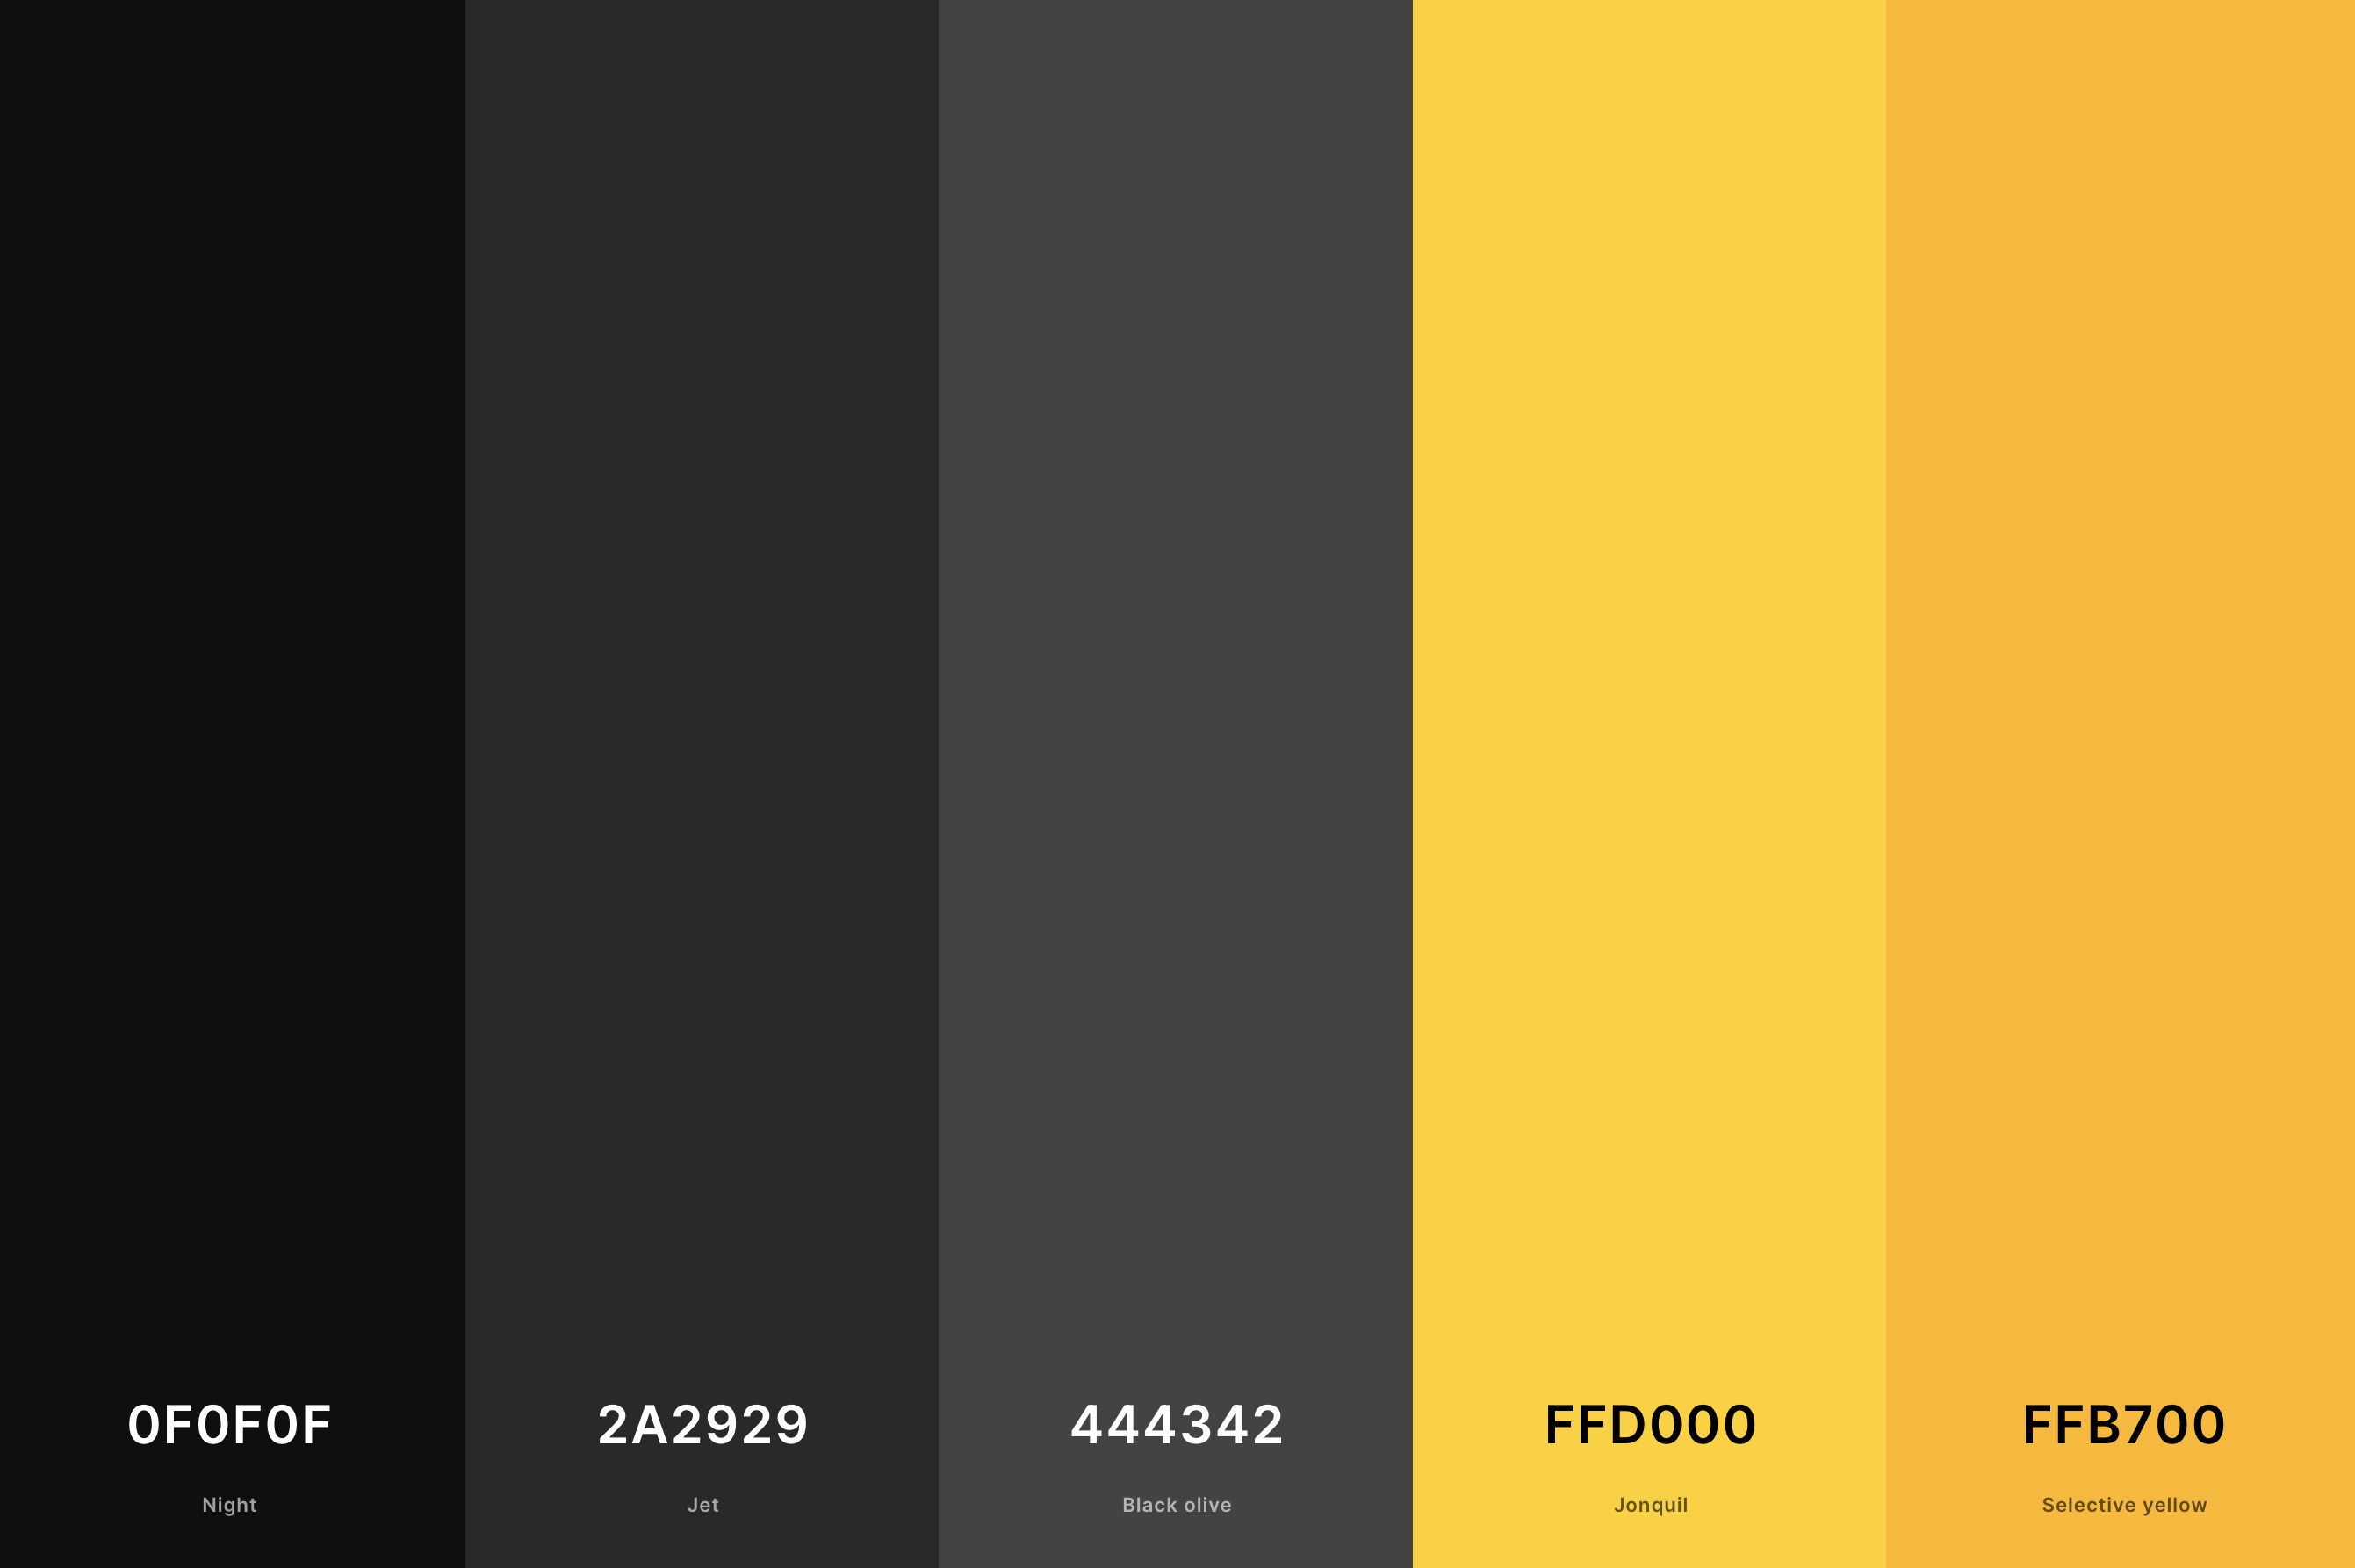 4. Black And Yellow Color Palette Color Palette with Night (Hex #0F0F0F) + Jet (Hex #2A2929) + Black Olive (Hex #444342) + Jonquil (Hex #FFD000) + Selective Yellow (Hex #FFB700) Color Palette with Hex Codes